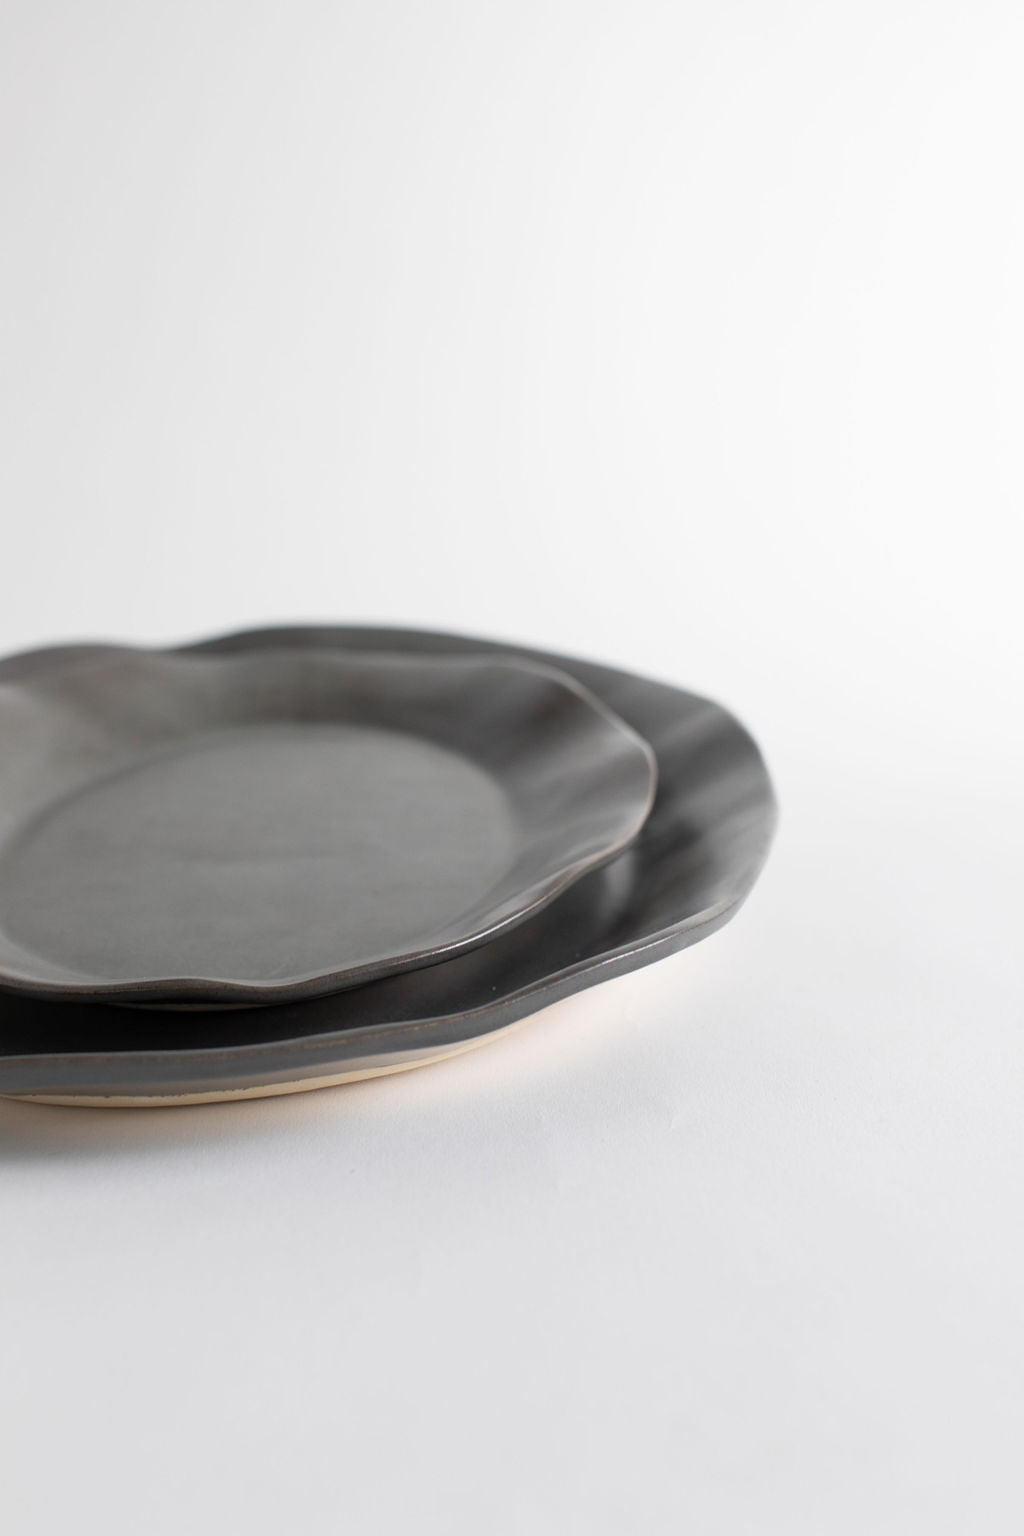 Charcoal Shino Oval Serving Platters